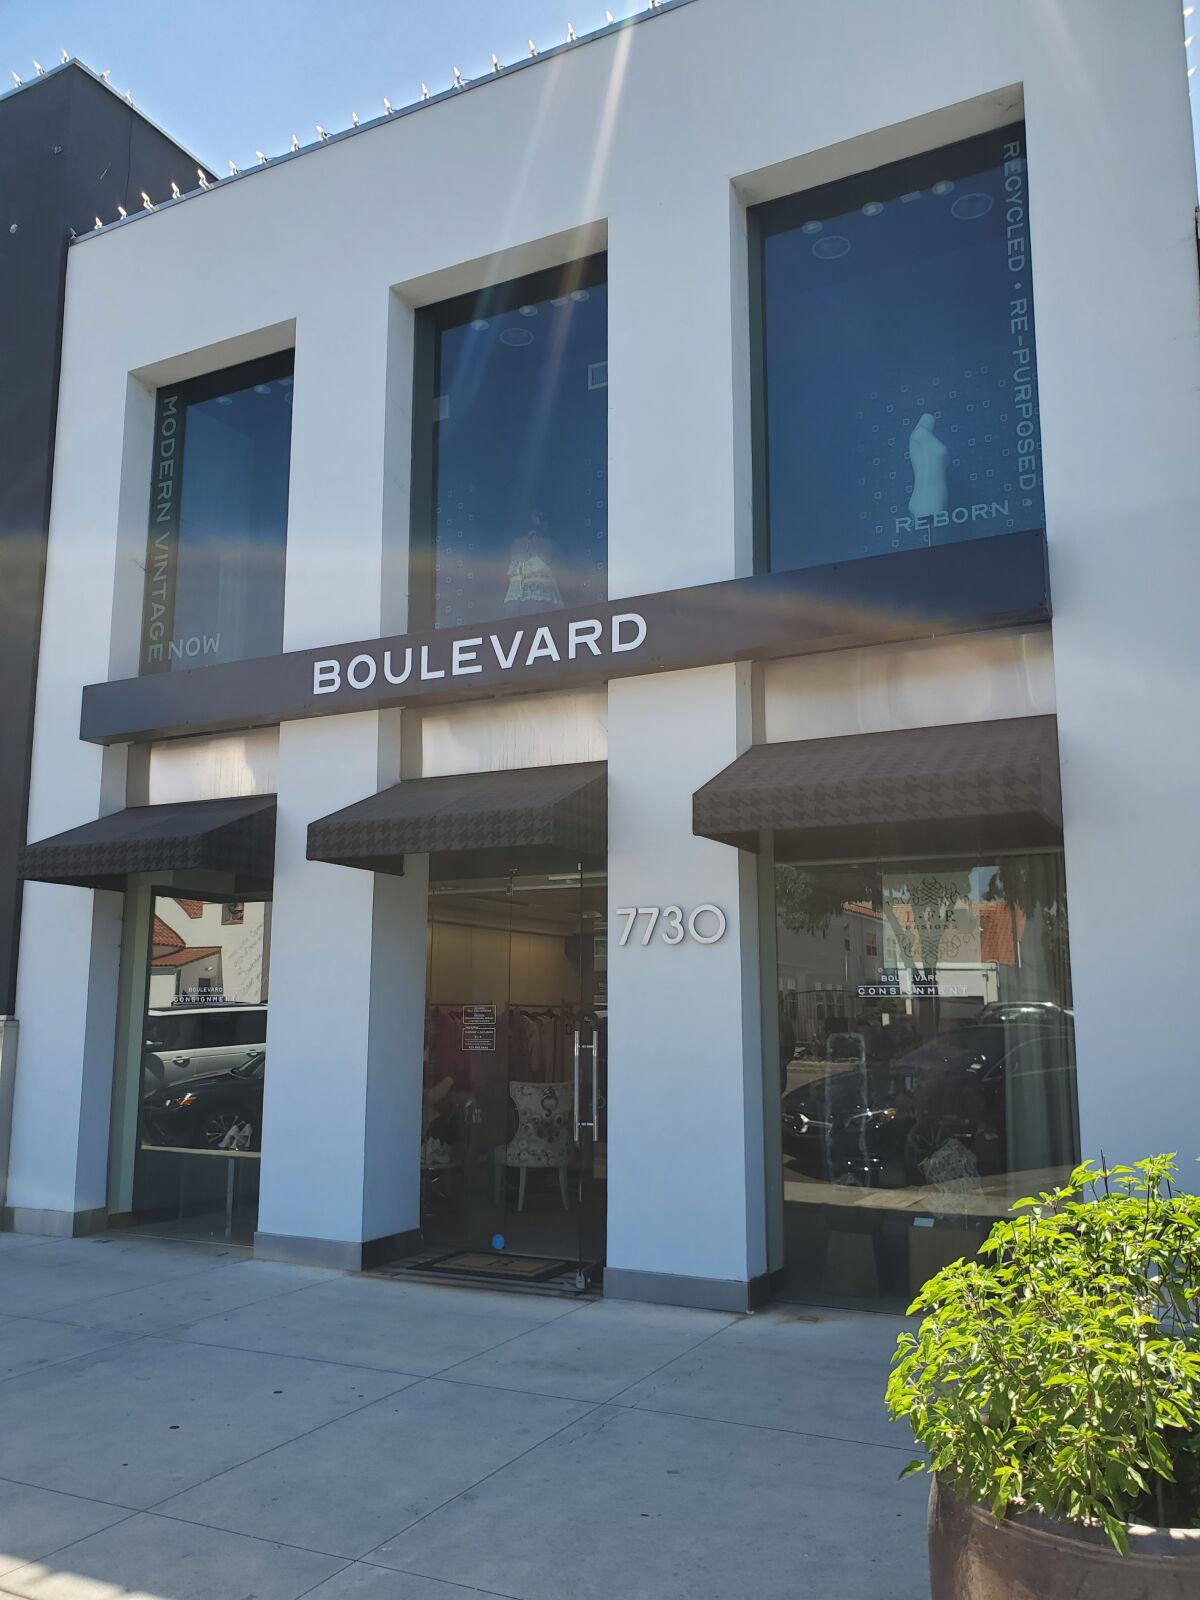 The Boulevard store at 7730 Girard Ave. in La Jolla will provide clothes for New York Fashion Week.